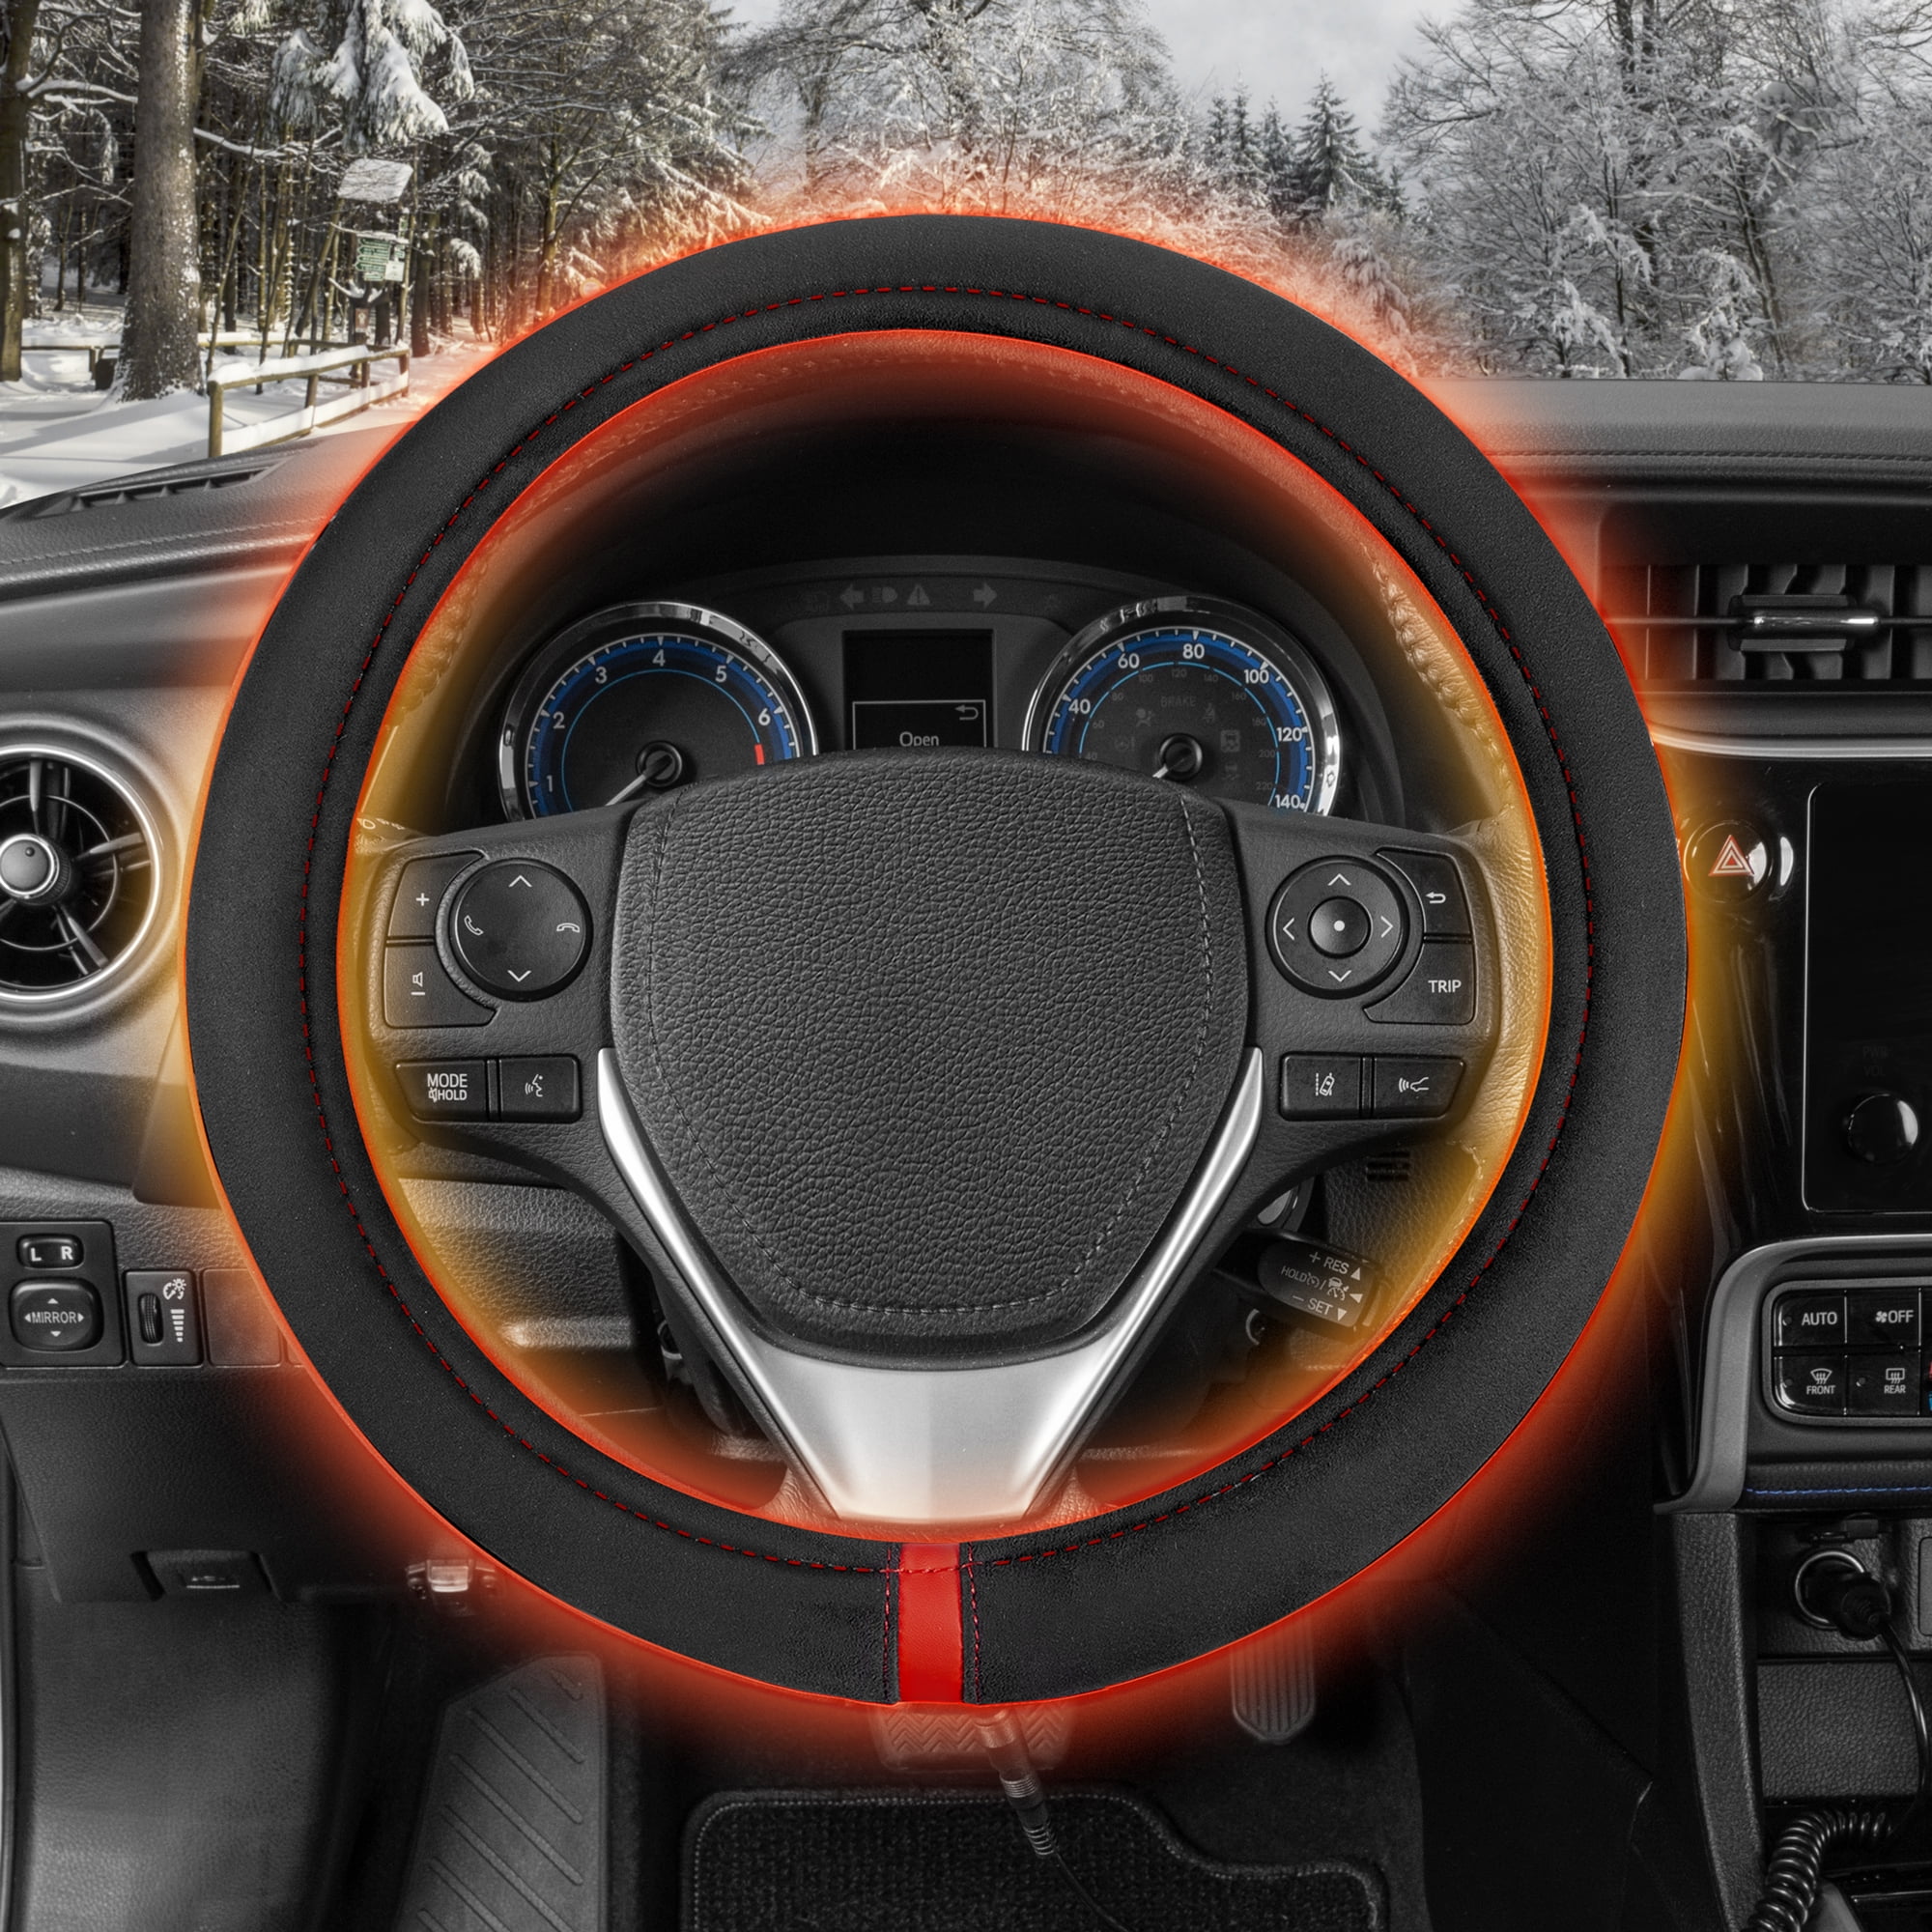 Heated Steering Wheel Cover,Universal15” 12V DC Quick Heating 2020 Upgraded Hand Warmer Soft Non Slip Fit for Car SUV 